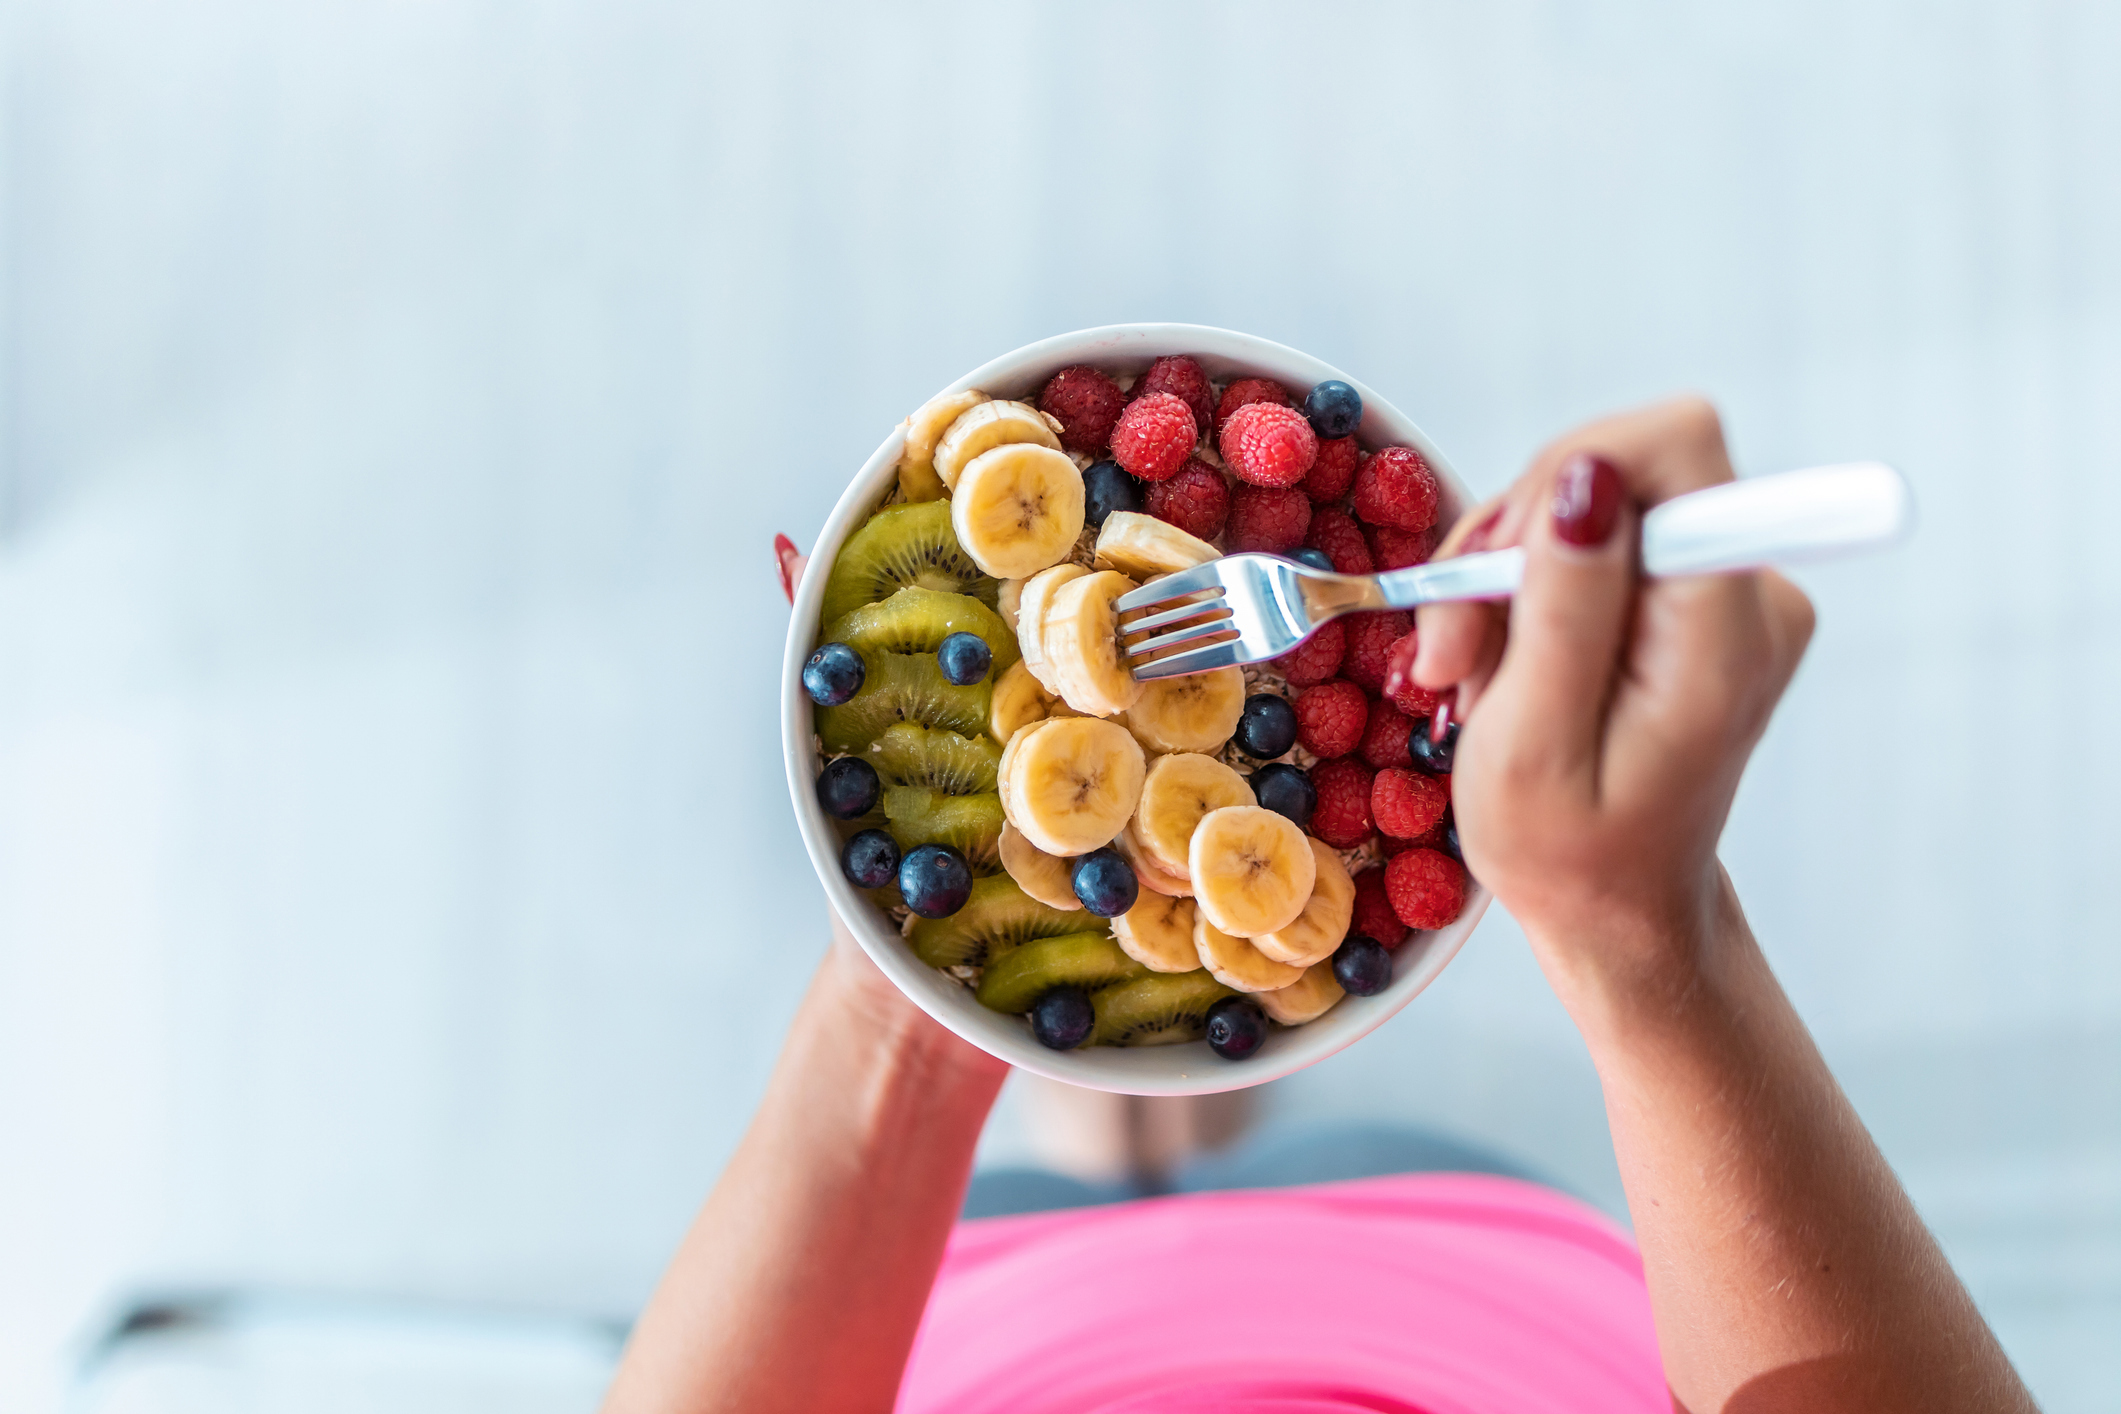 Close-up of woman's hands holding a bowl with fresh fruit while standing at home.